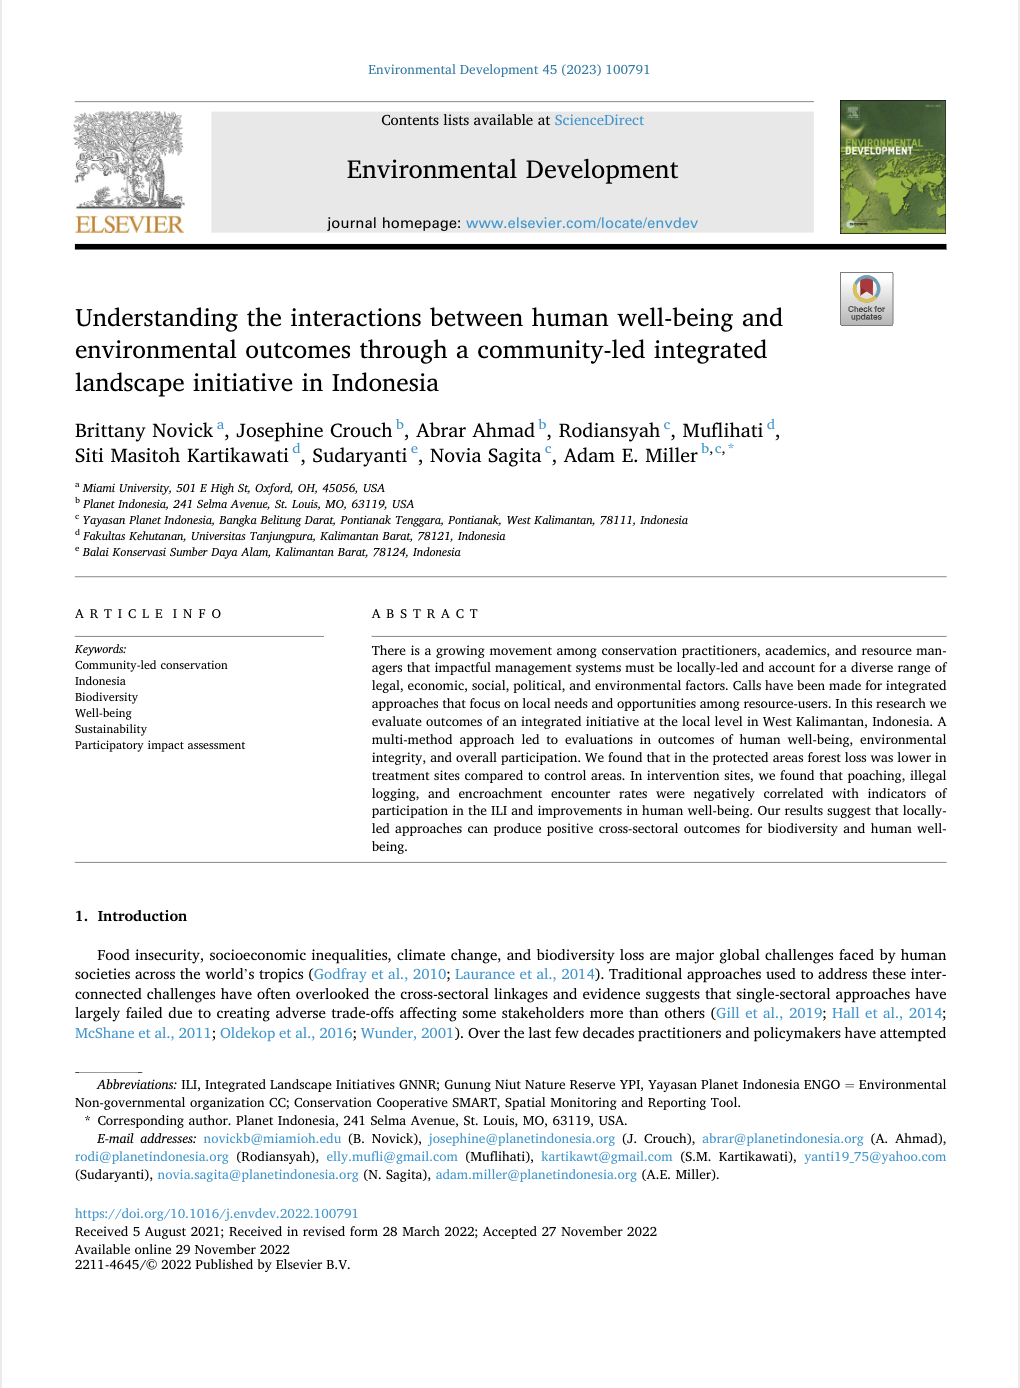 Understanding the interactions between human well-being and environmental outcomes through a community-led integrated landscape initiative in Indonesia